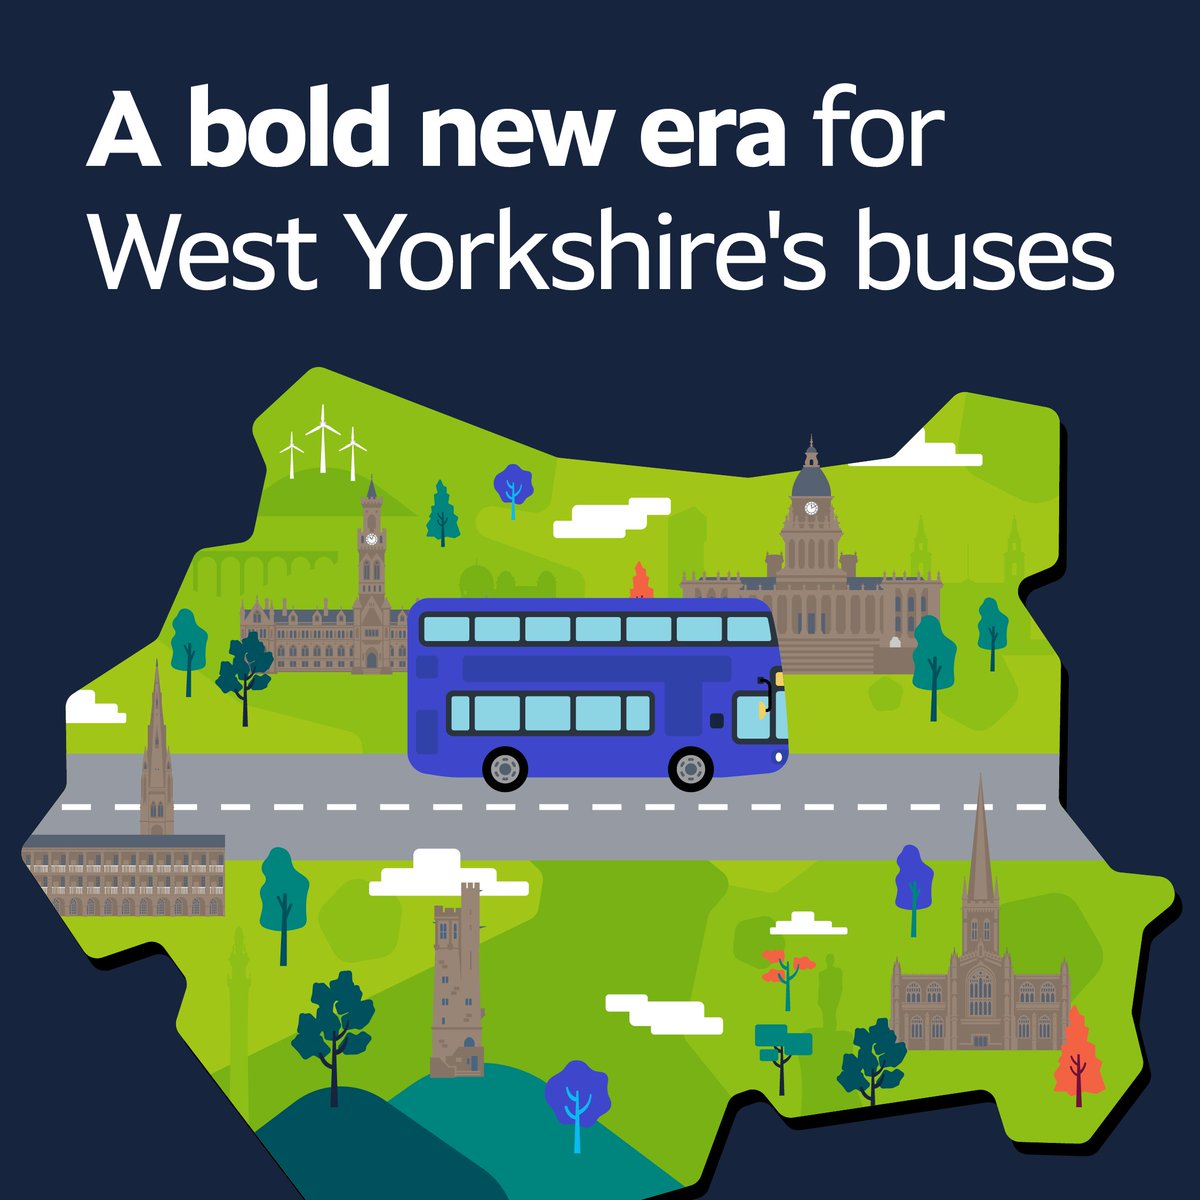 Franchising may take time, but we’re not standing still! We're already delivering better buses across West Yorkshire through: 💰 £2 capped Mayor's Fares 🕔 More buses, more often 🚌 Upgraded stops, shelters and stations and much more! For more info: westyorks-ca.gov.uk/improving-buses